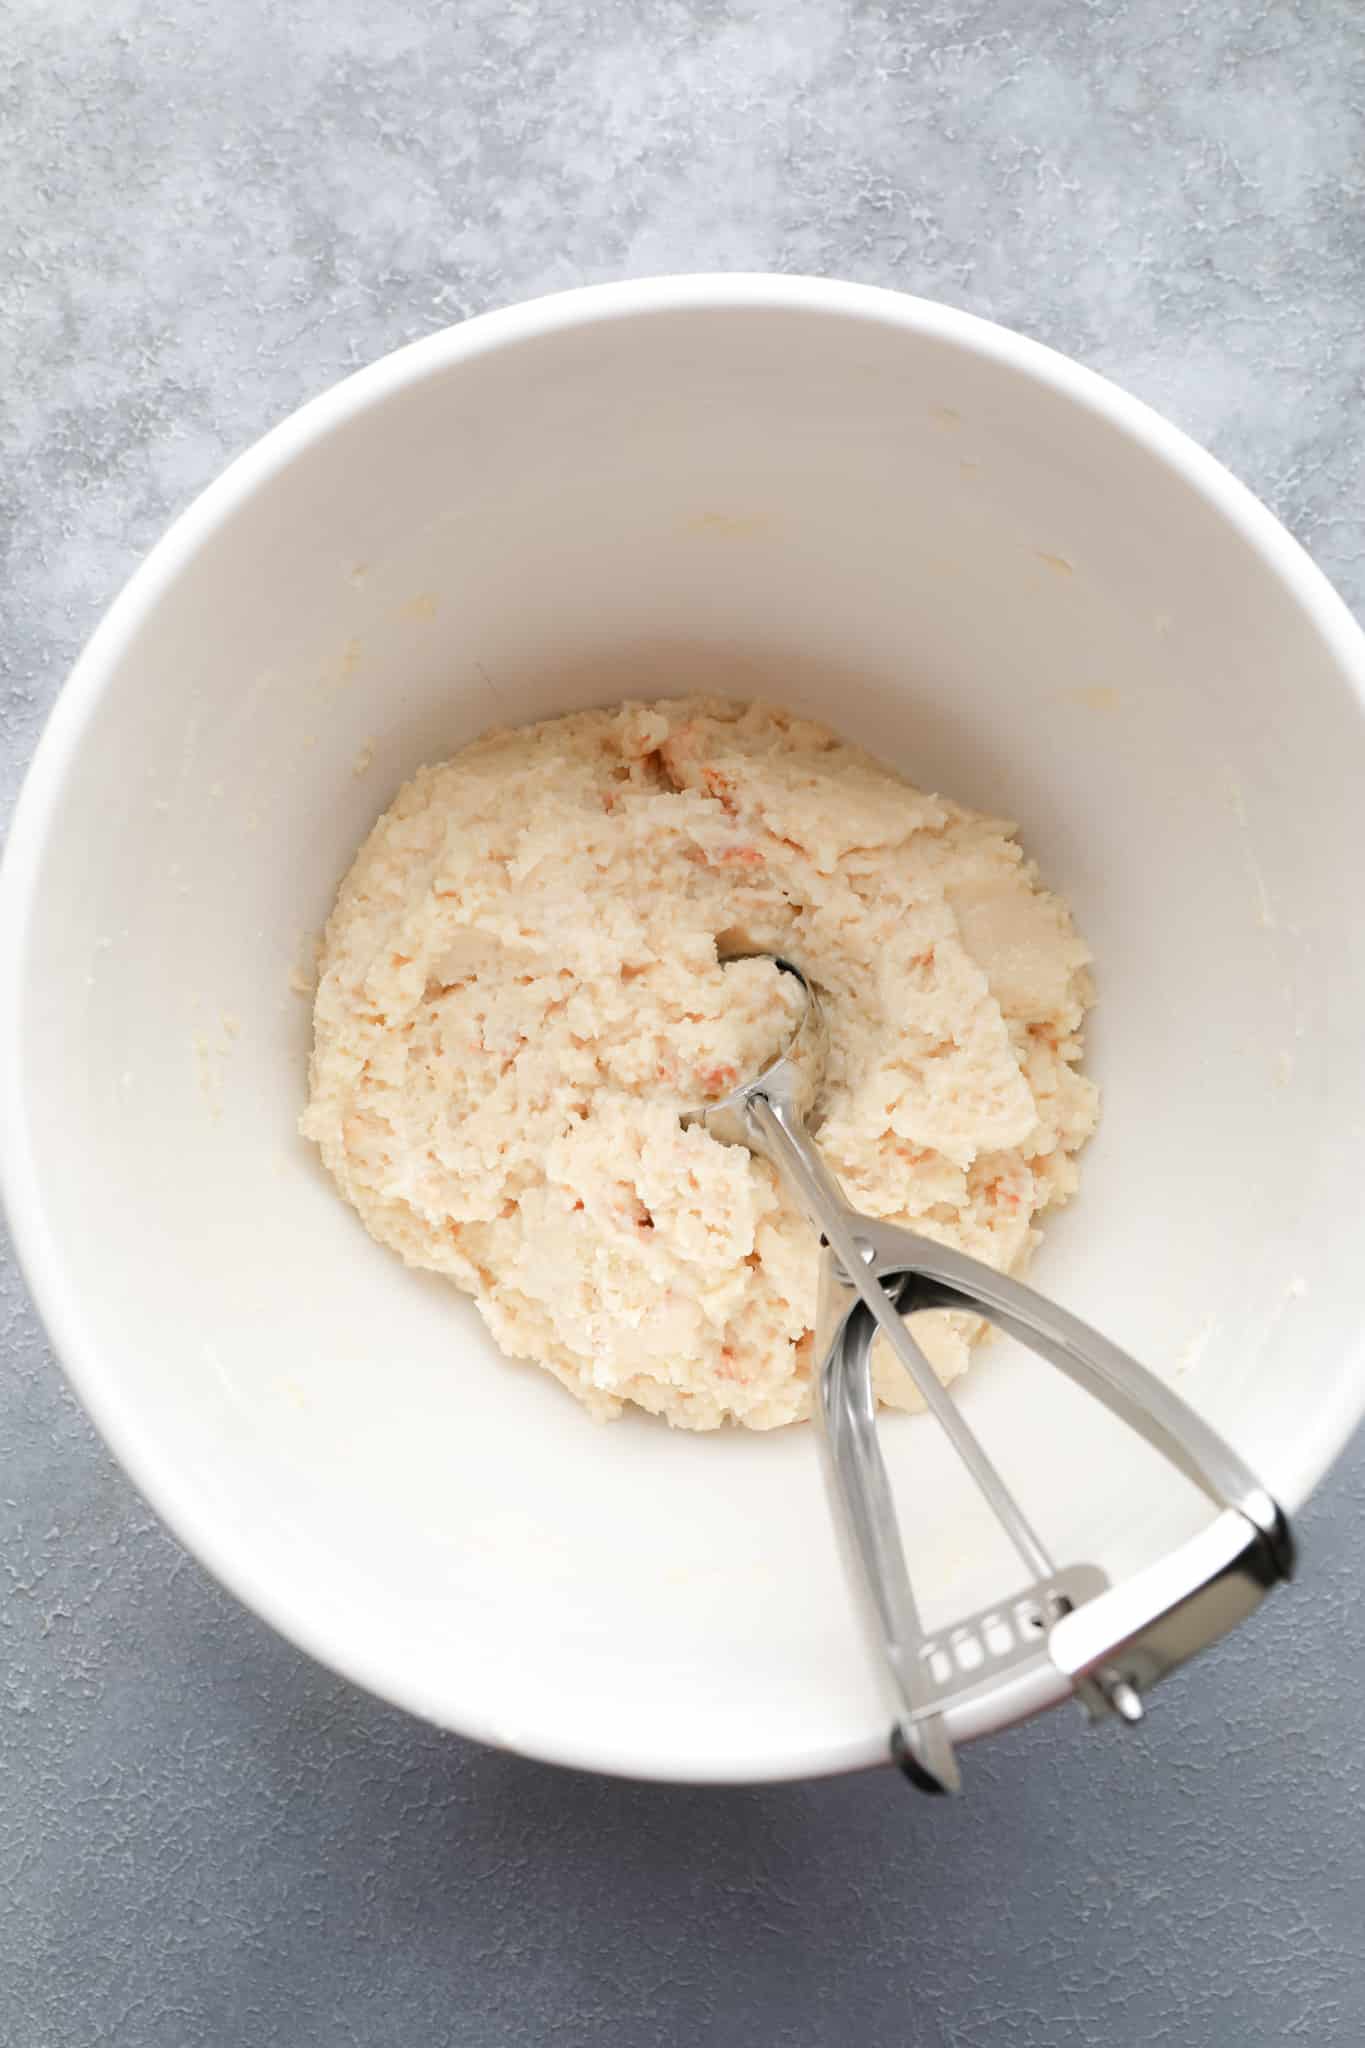 using a cookie scoop to lift a scoop of a crumbled cake and frosting mixture from a white bowl.